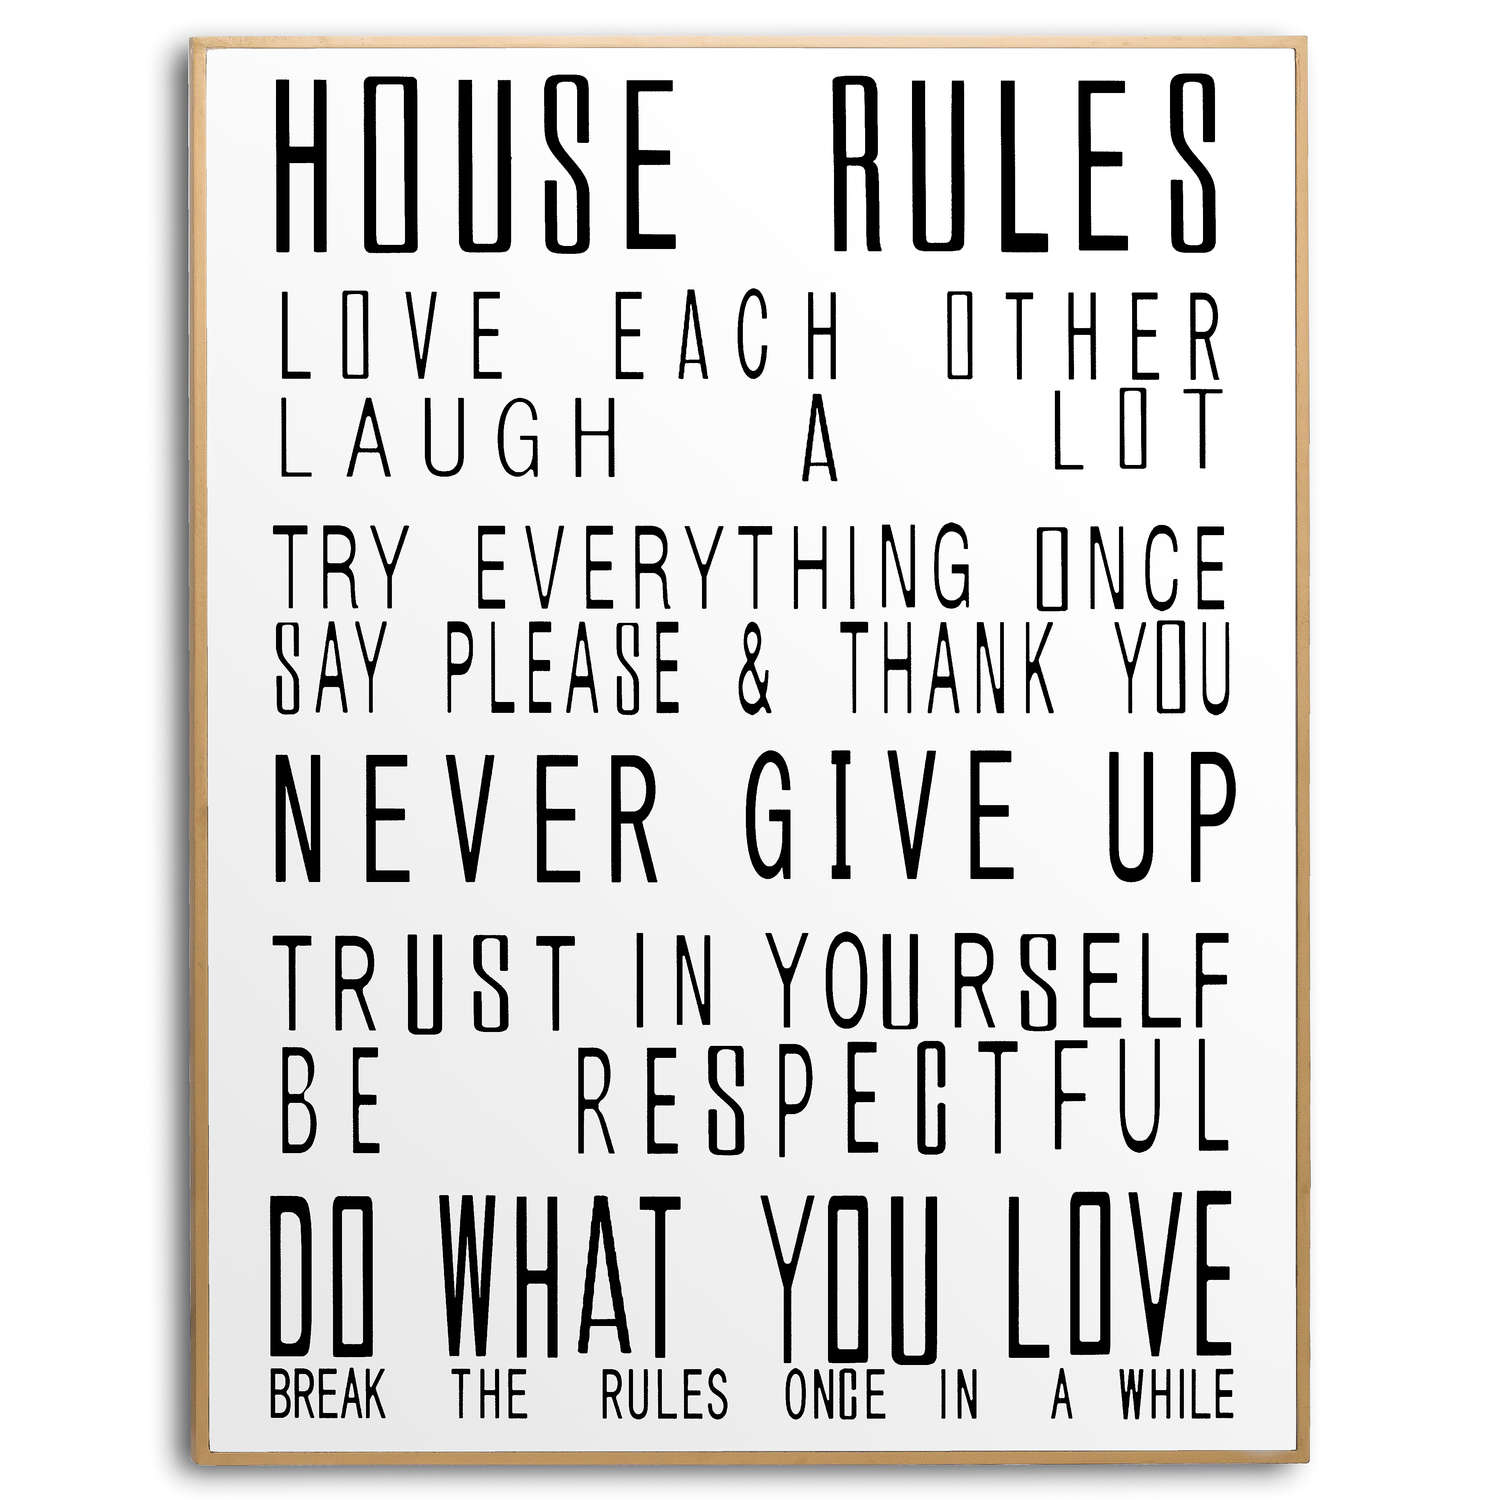 View Large Glass House Rules Wall Art information